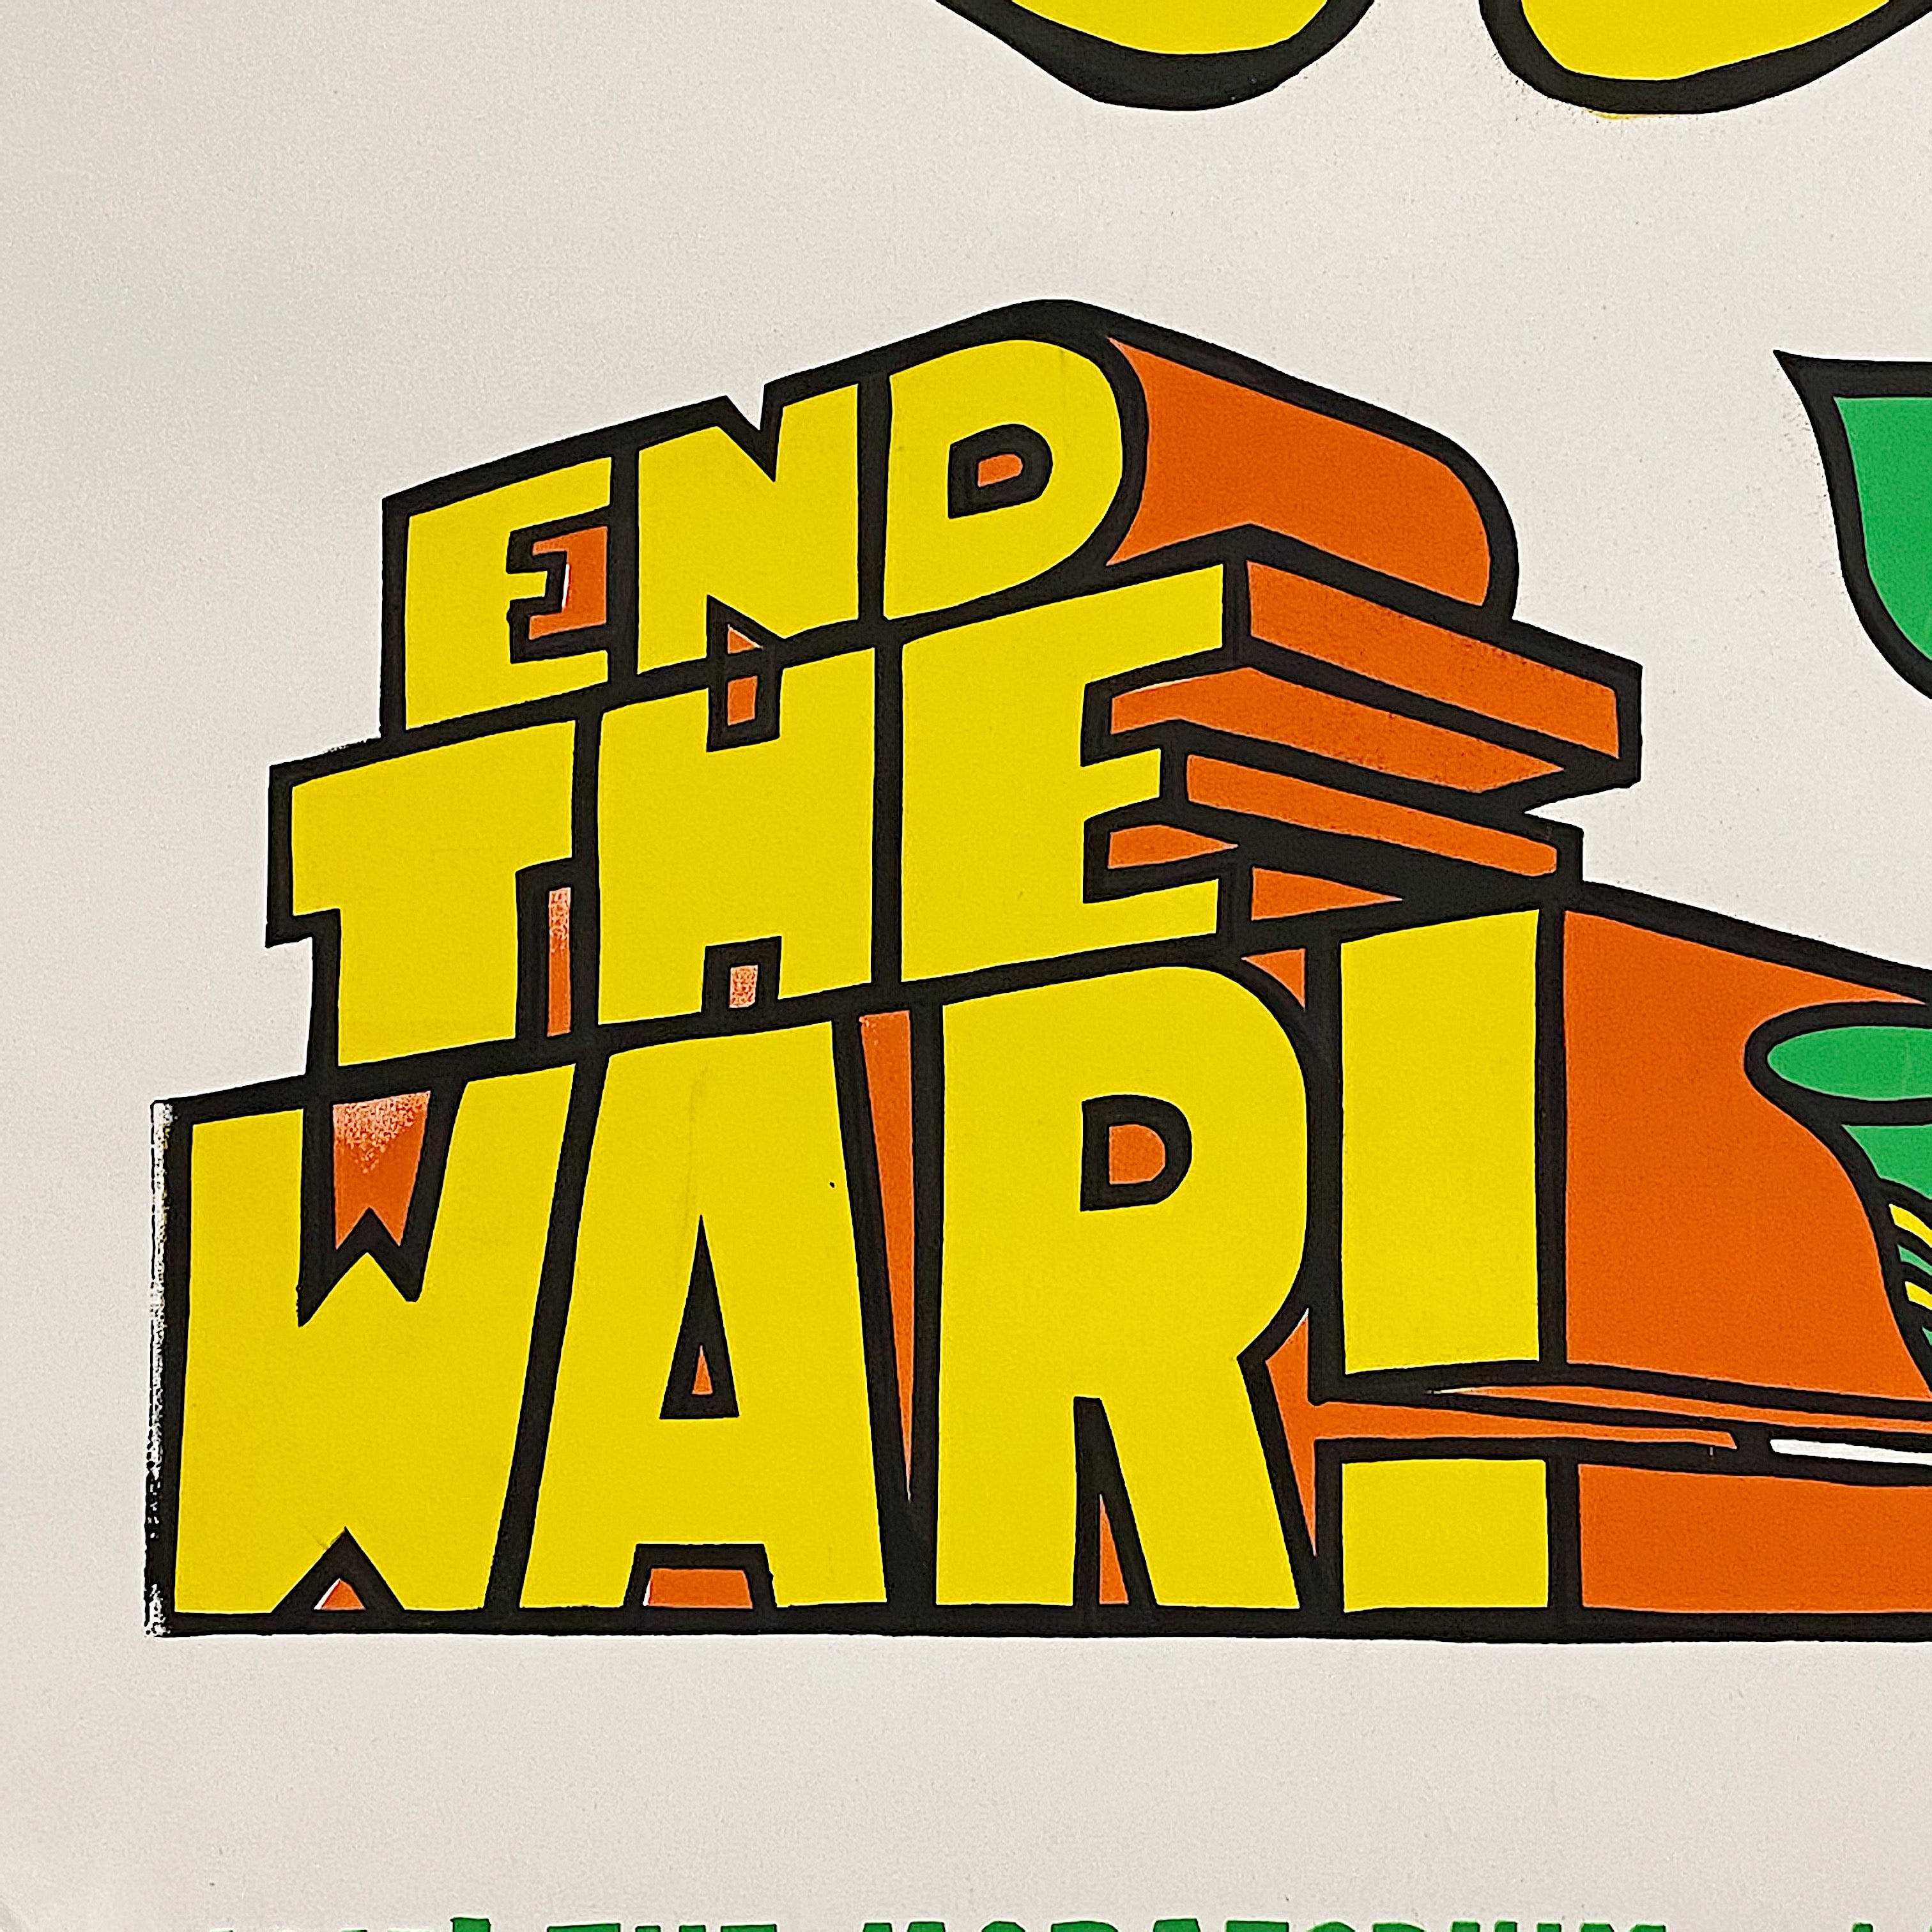 Rare Moratorium Protest Poster from late 60s | End the War!